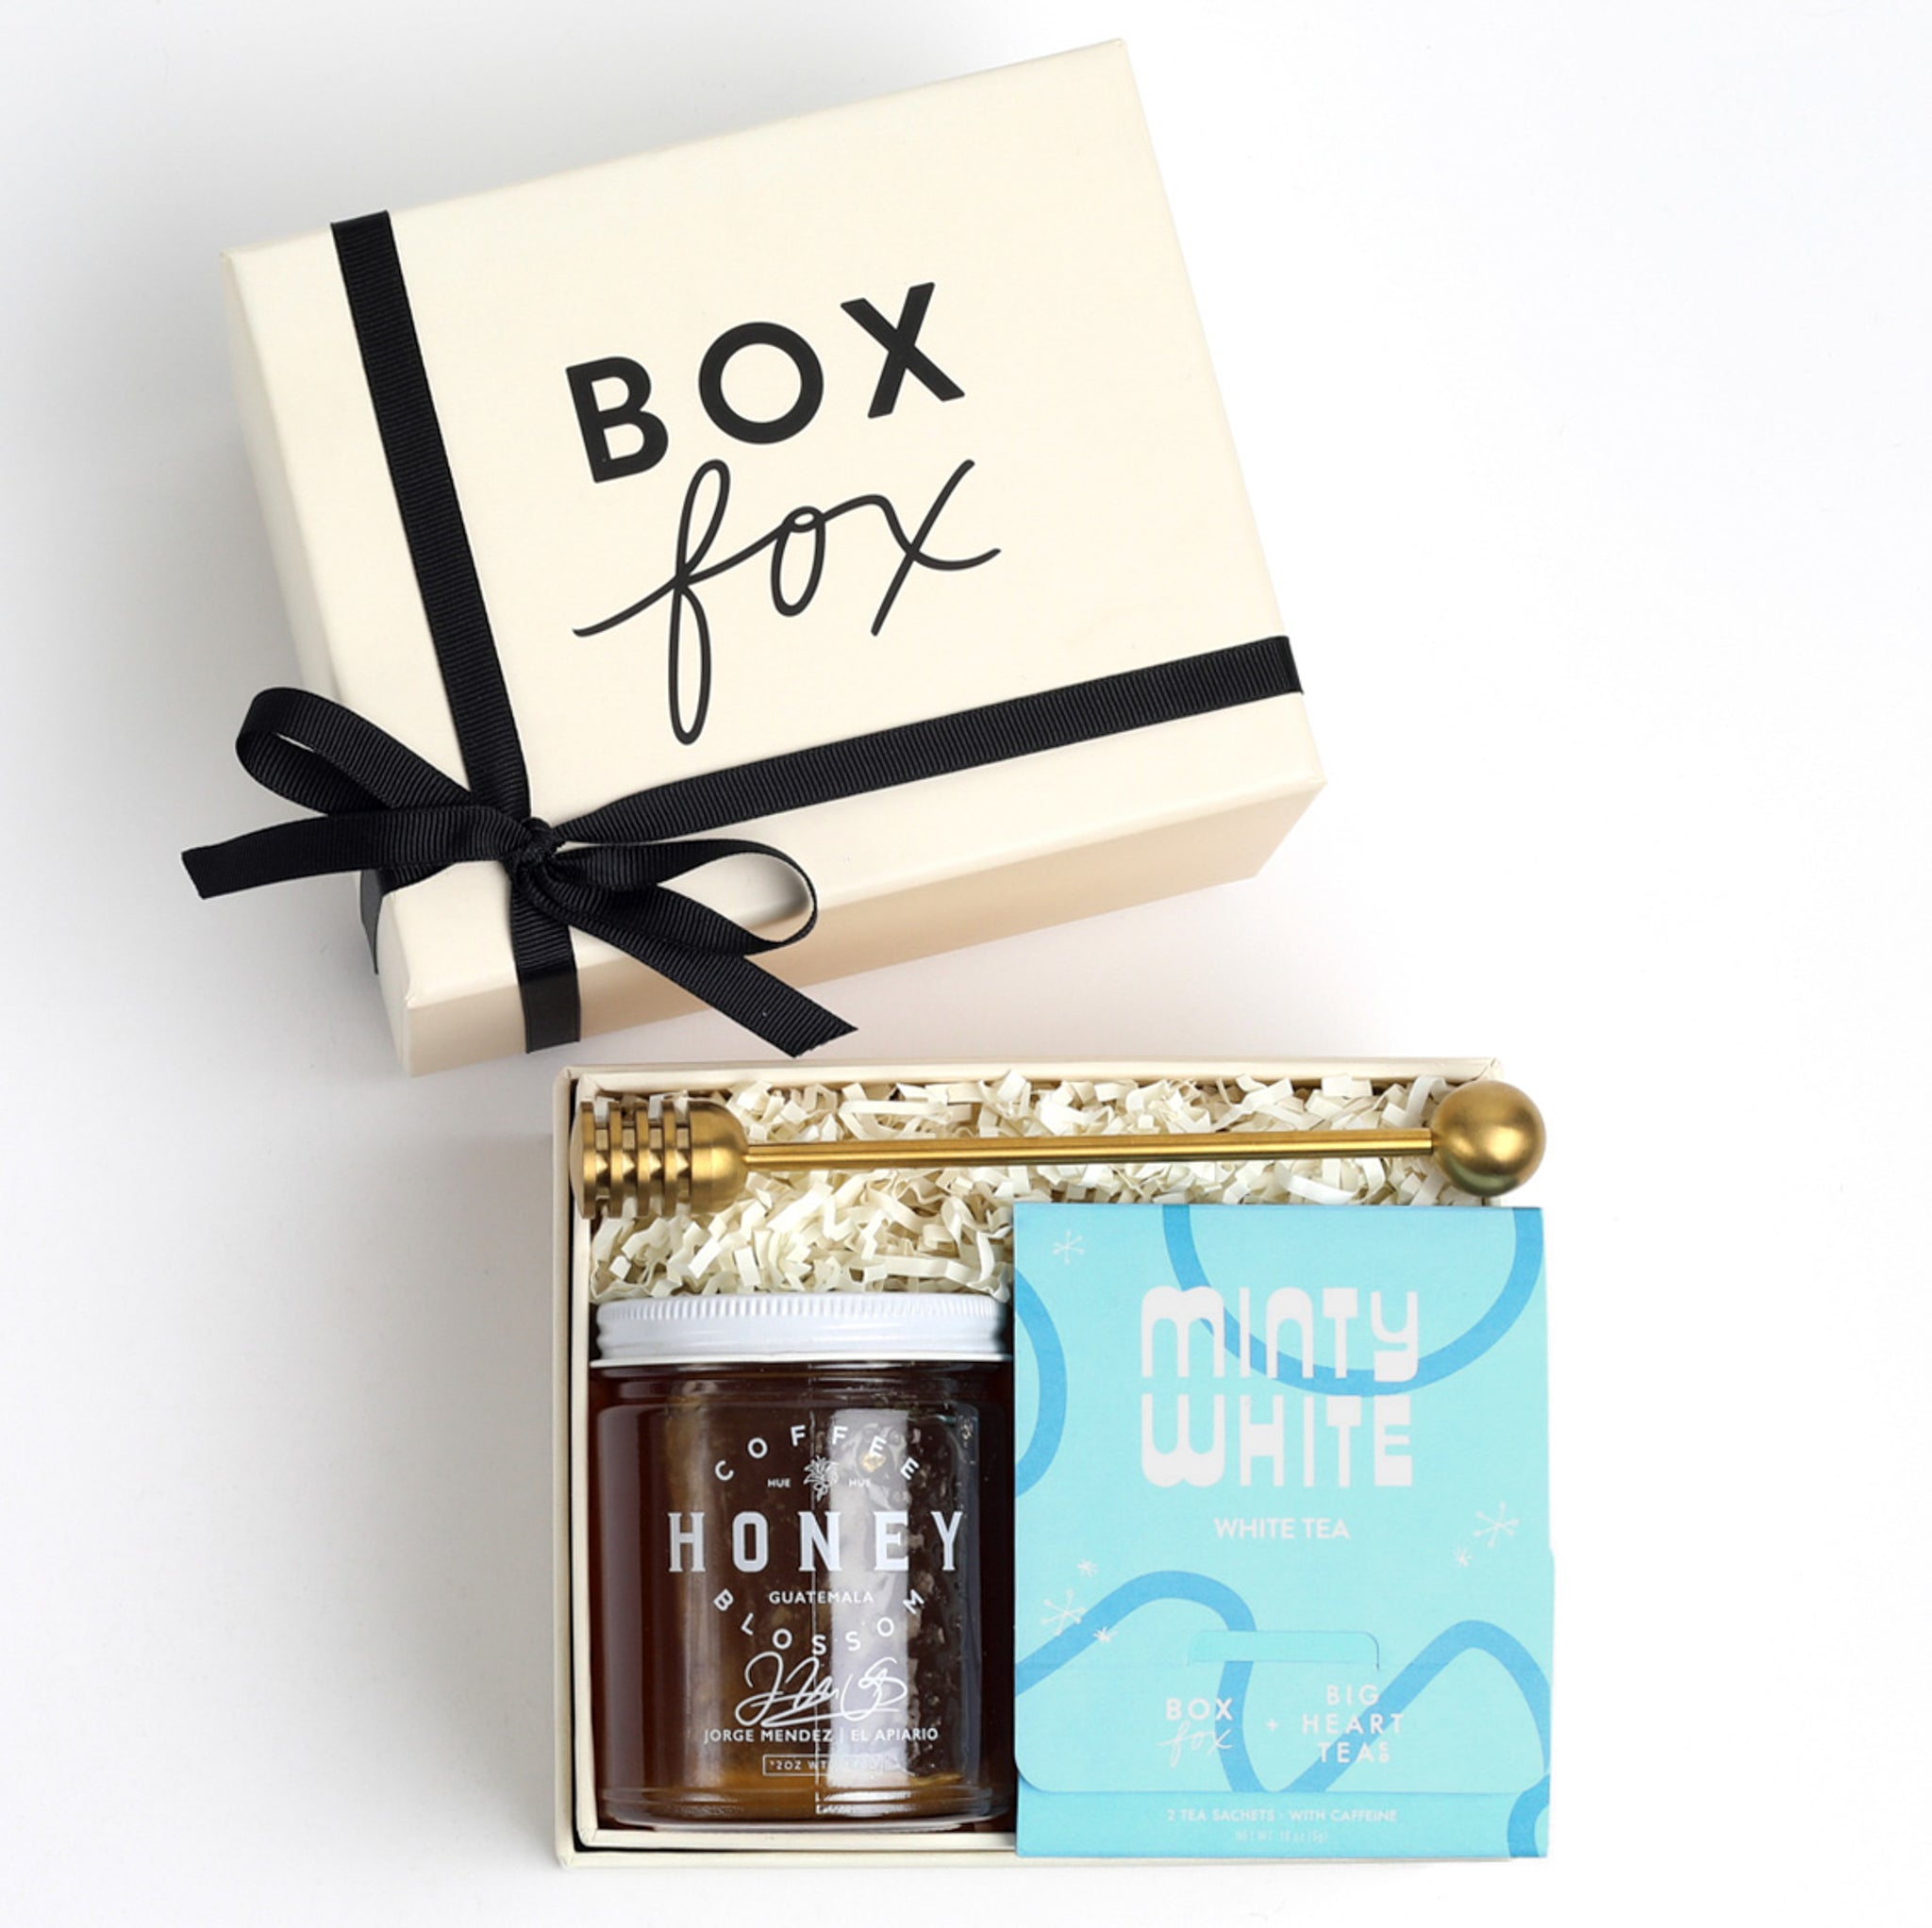 BOXFOX Creme gift box packed with gold honey dipper, jar of honey and blue minty why tea sachet